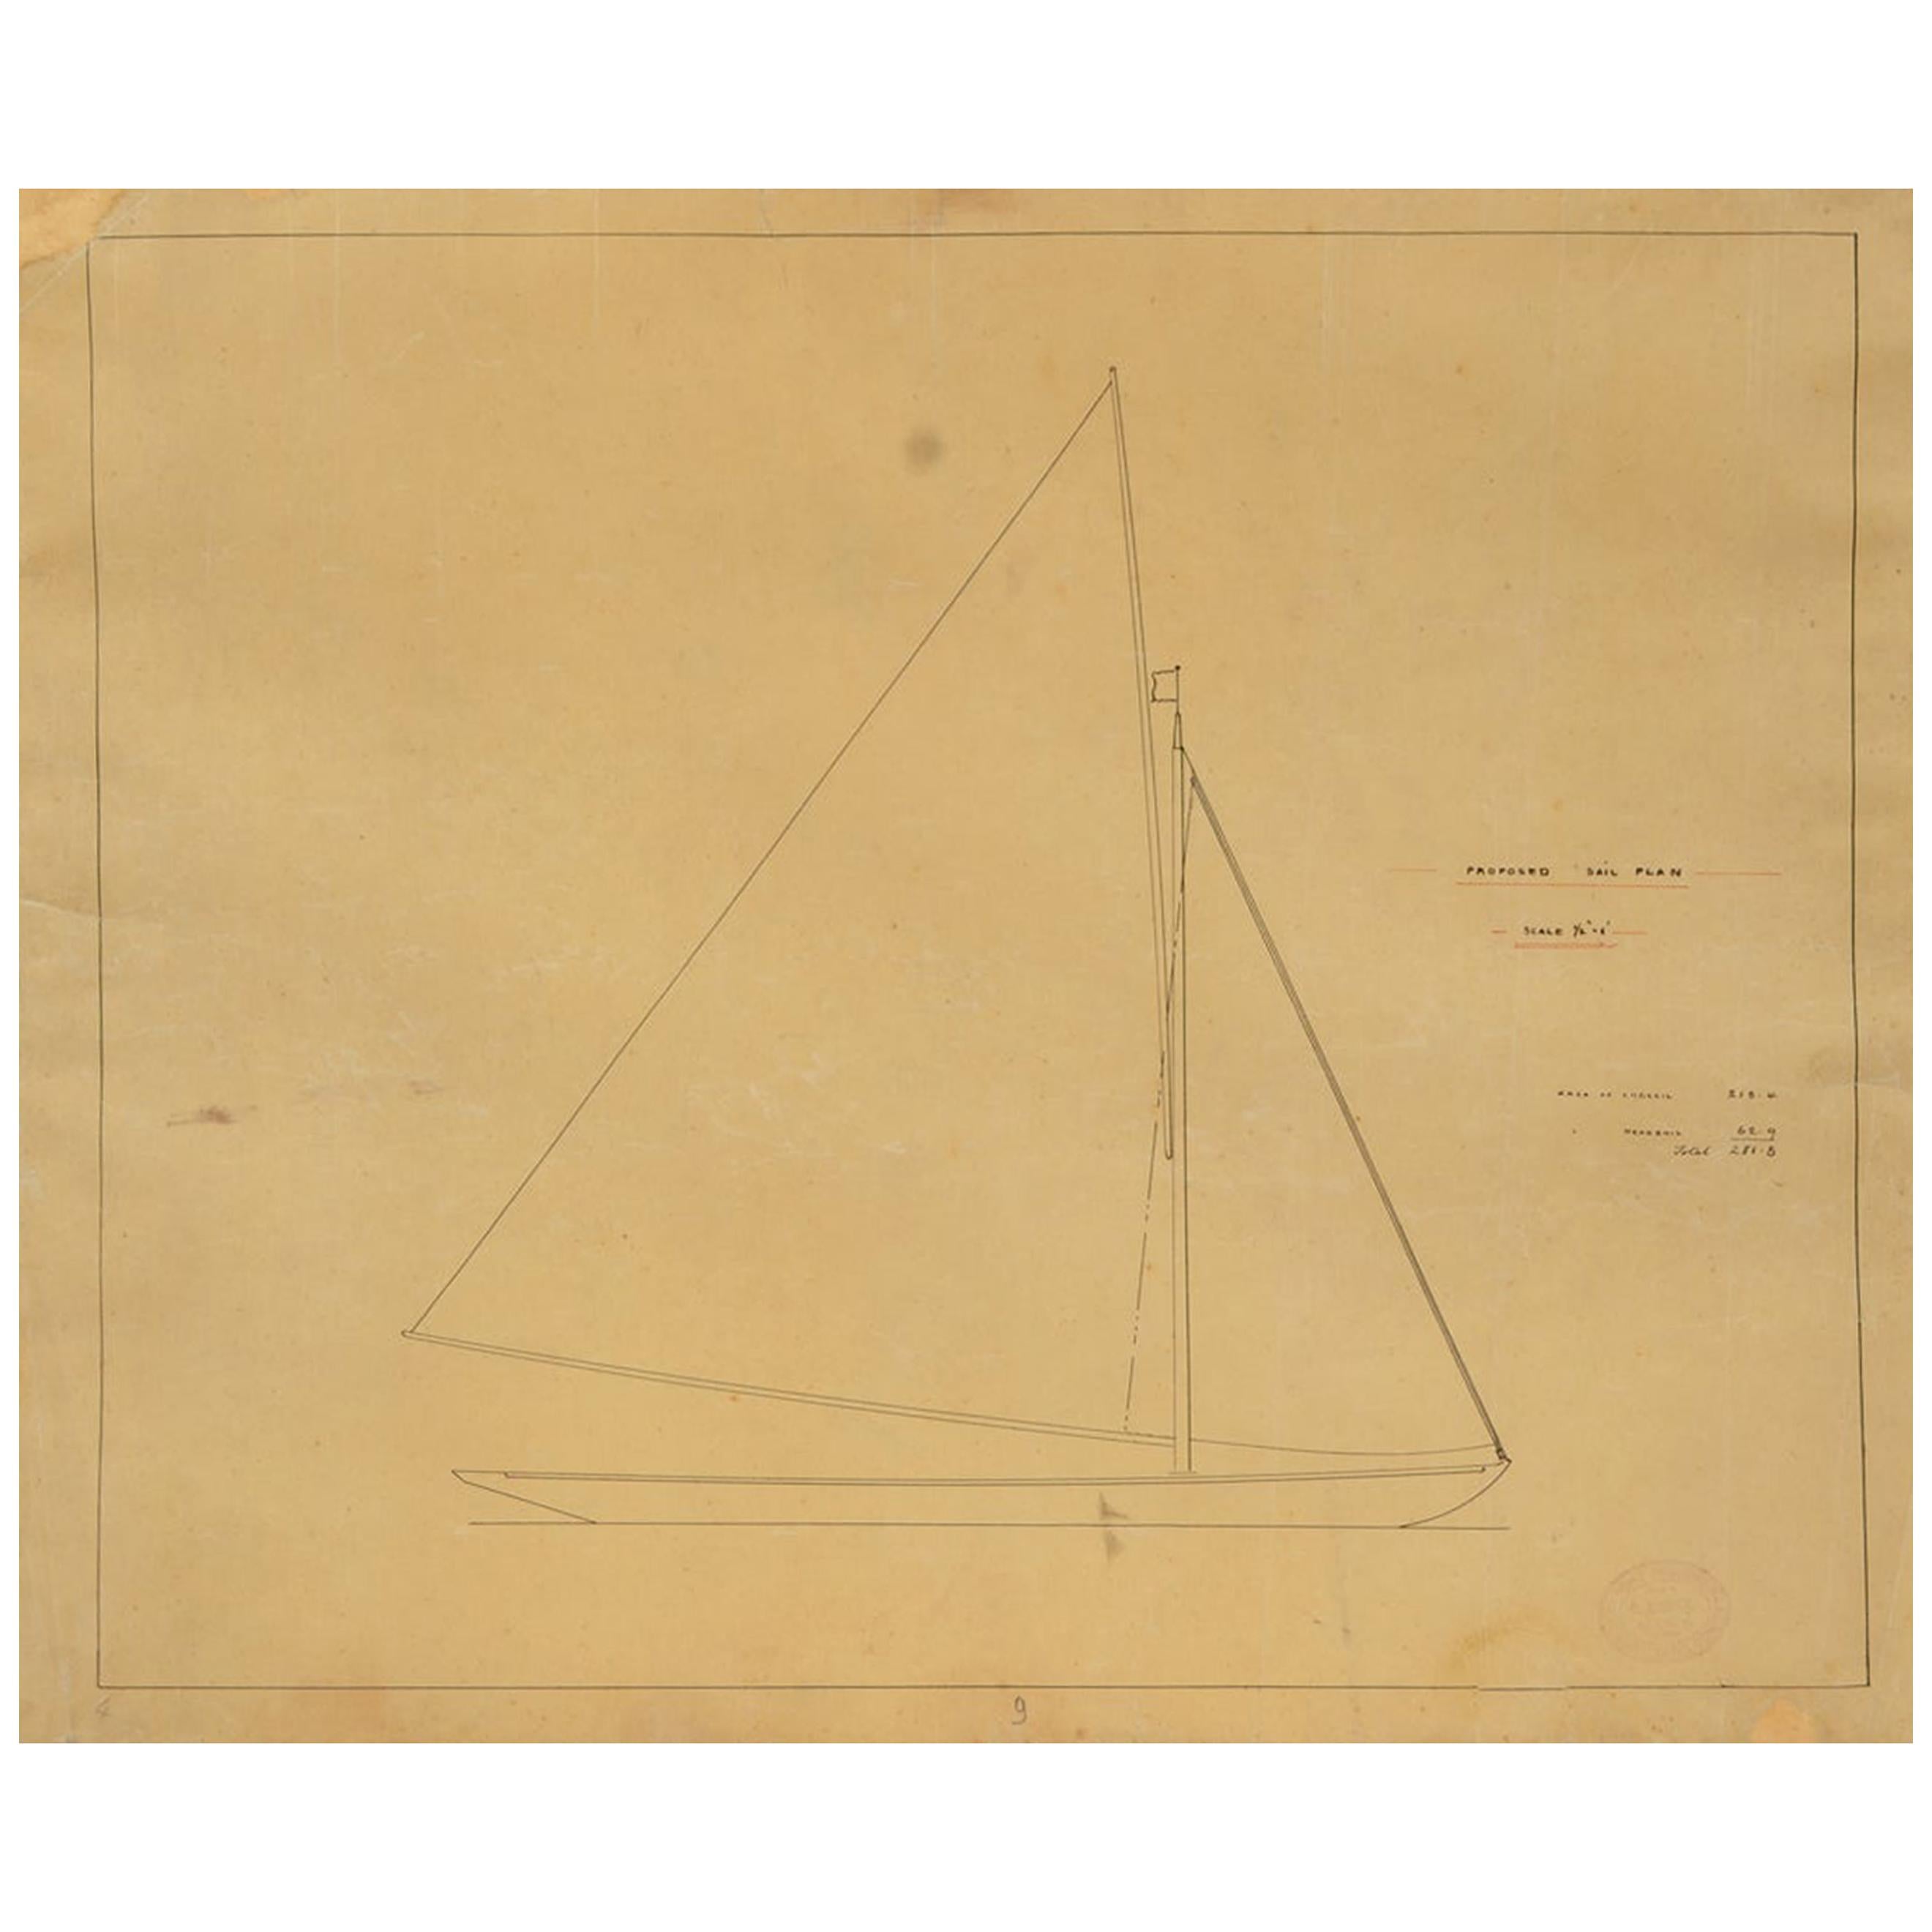 Late 19th century Nautical Project by Charles Sibbick from the Uffa Fox Archives For Sale